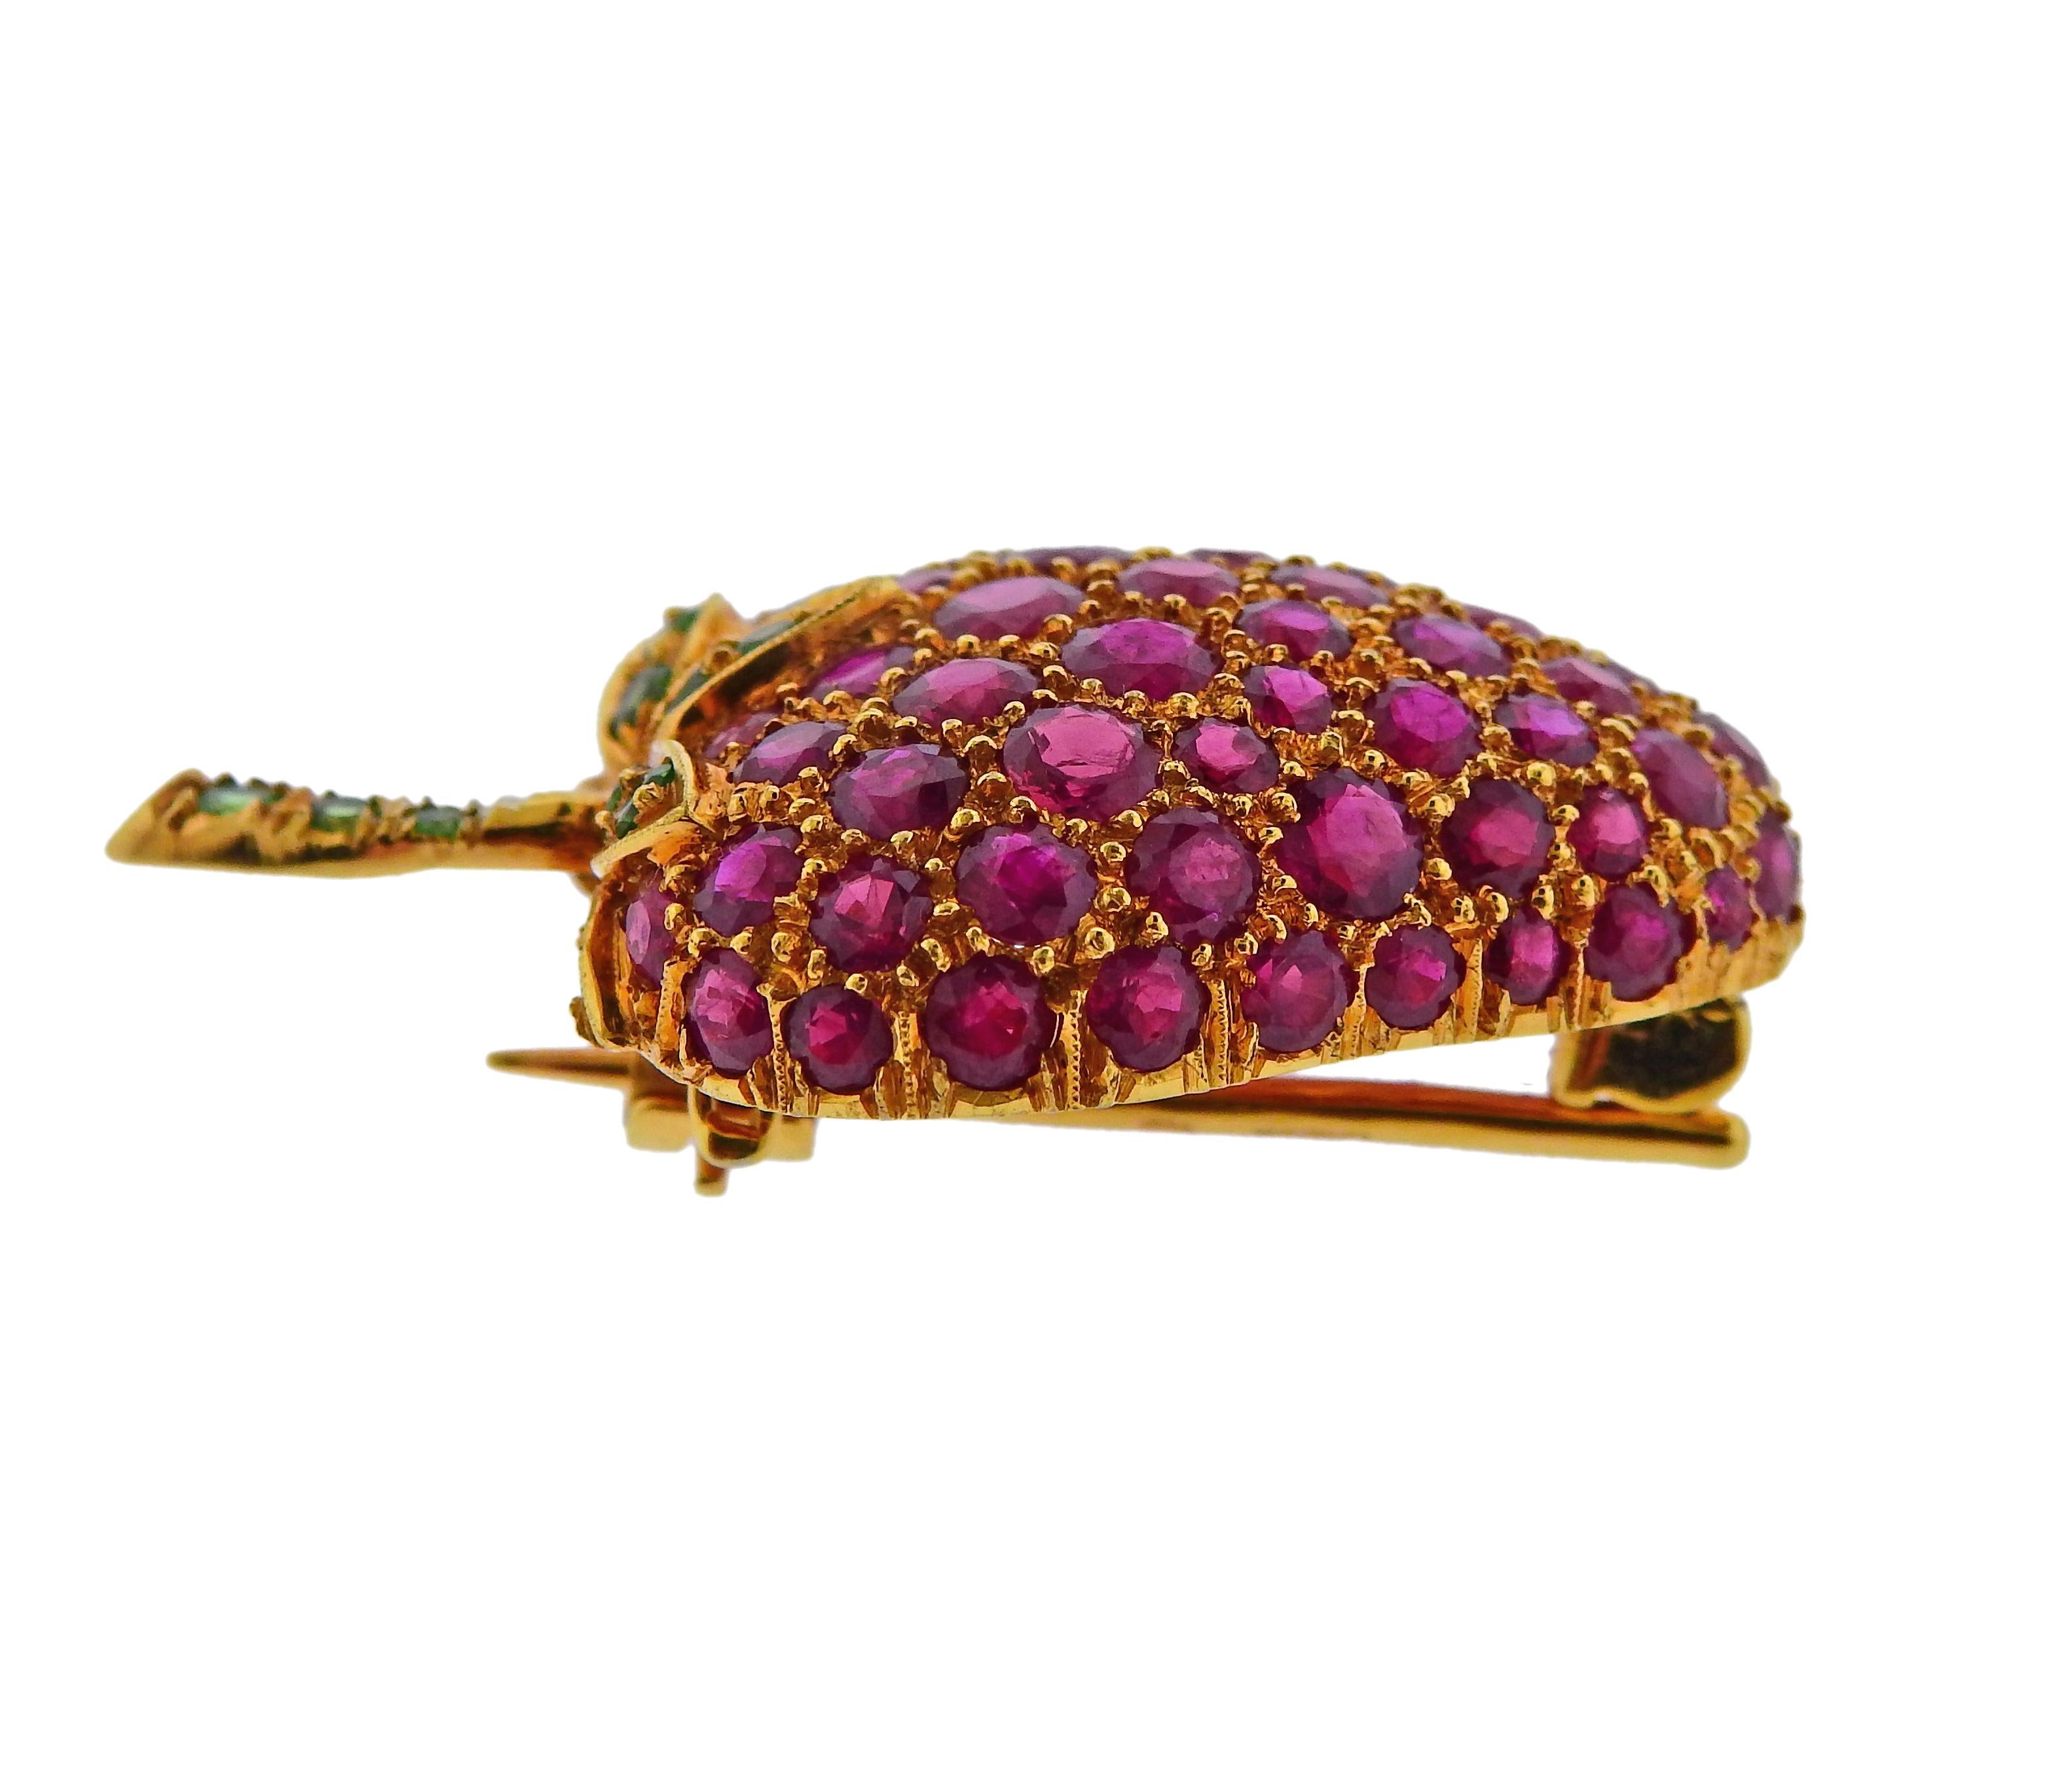 Adorable 18k gold strawberry brooch, crafted by Diafini, set with tsavorite garnets and rubies. The brooch is 38mm x 25mm. Marked Diafini 750 on the stem. Weighs 10.9 grams.

SKU#PB-01394